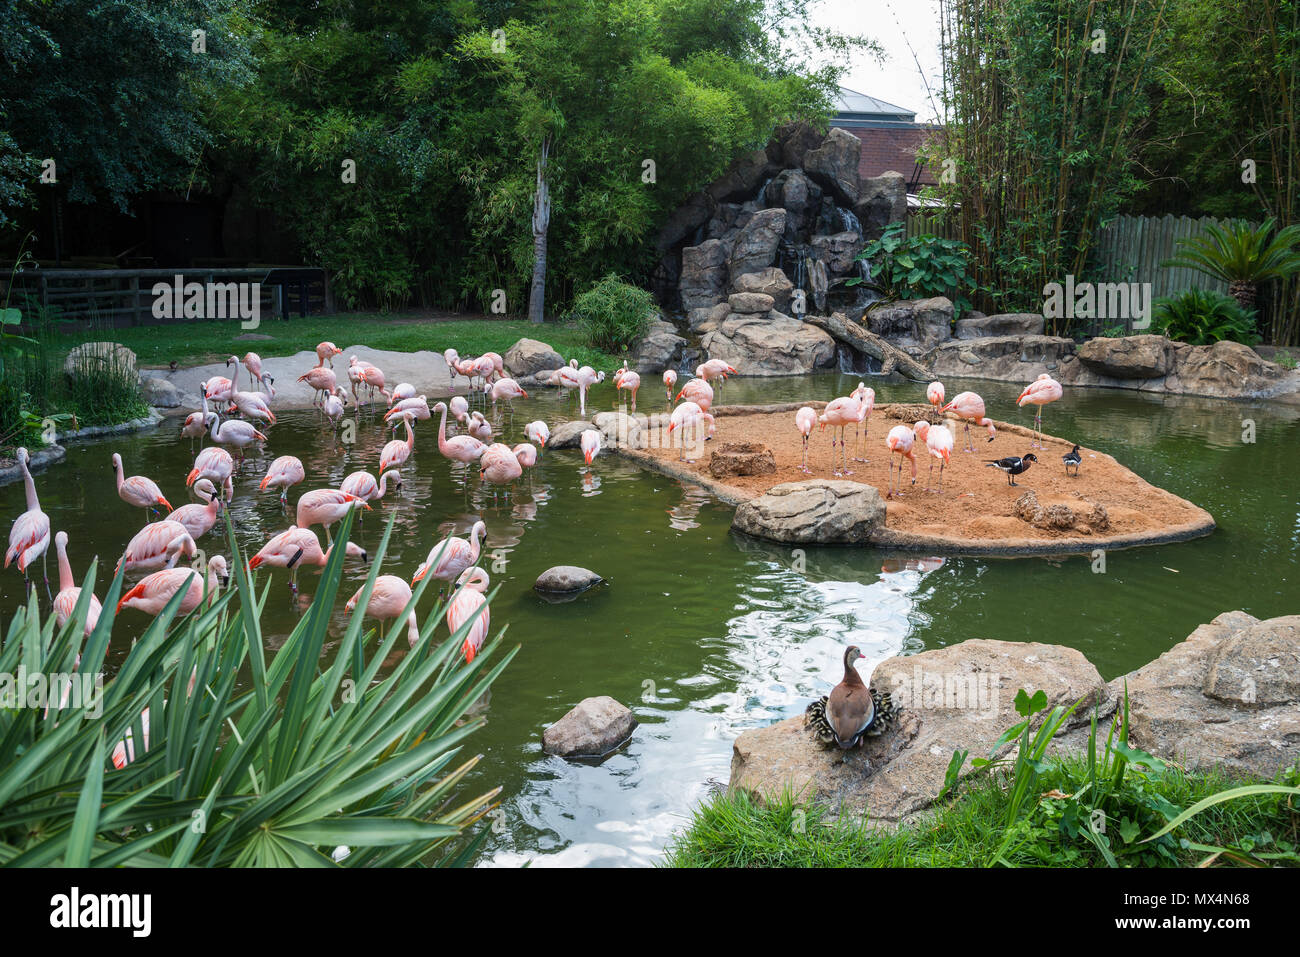 Flamingos and other water fowls gather at a pond in Houston Zoo. Houston, Texas, USA. Stock Photo